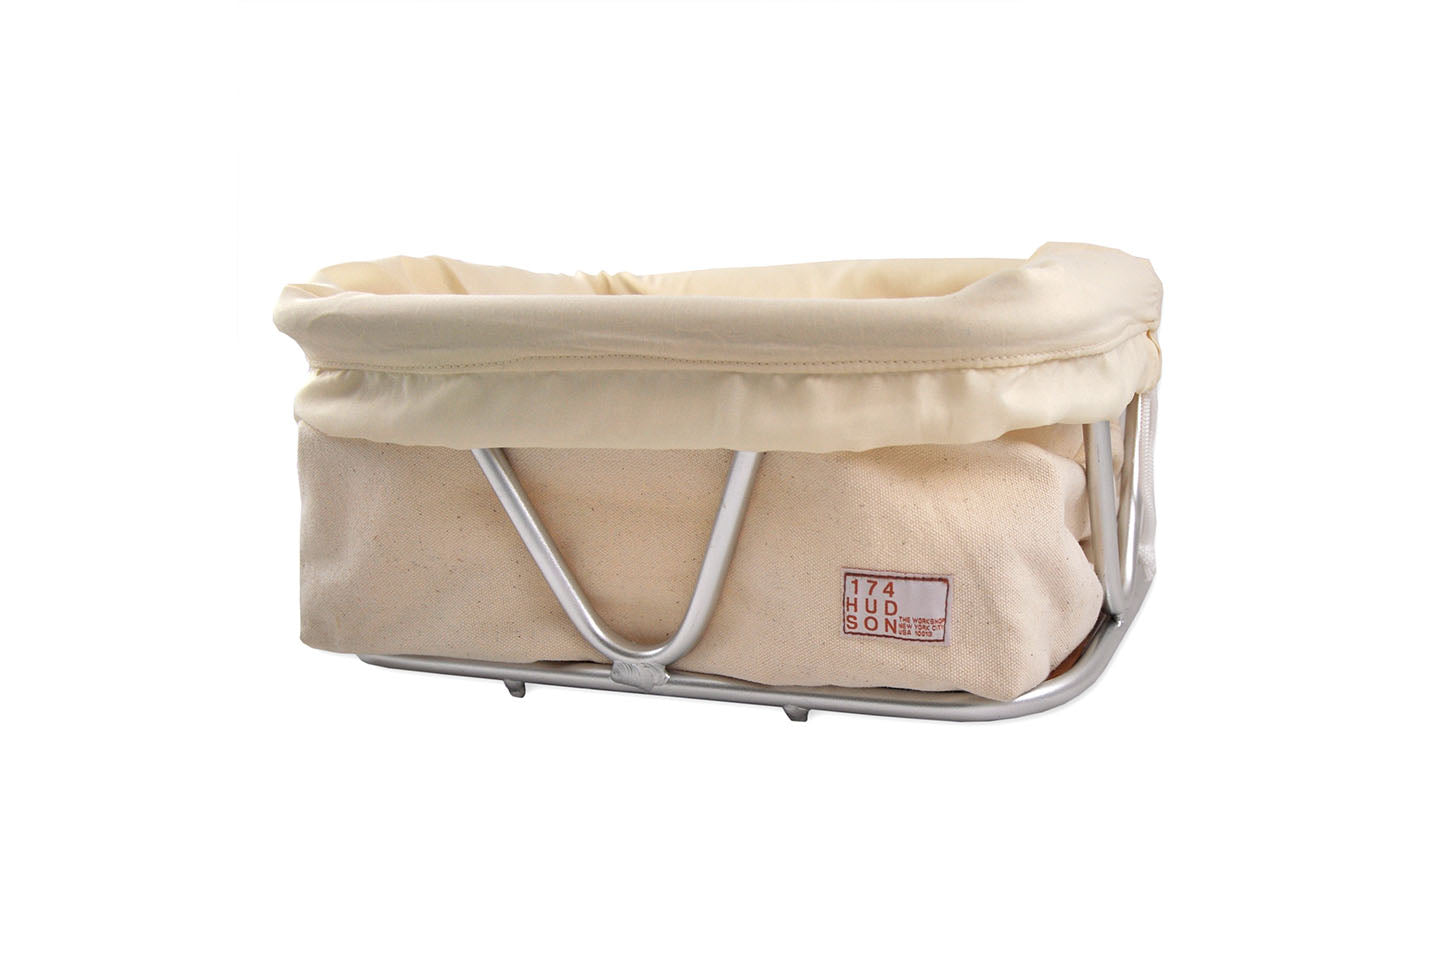 The Priority Bicycles Basket Bag Liner with Drawstring in Cream